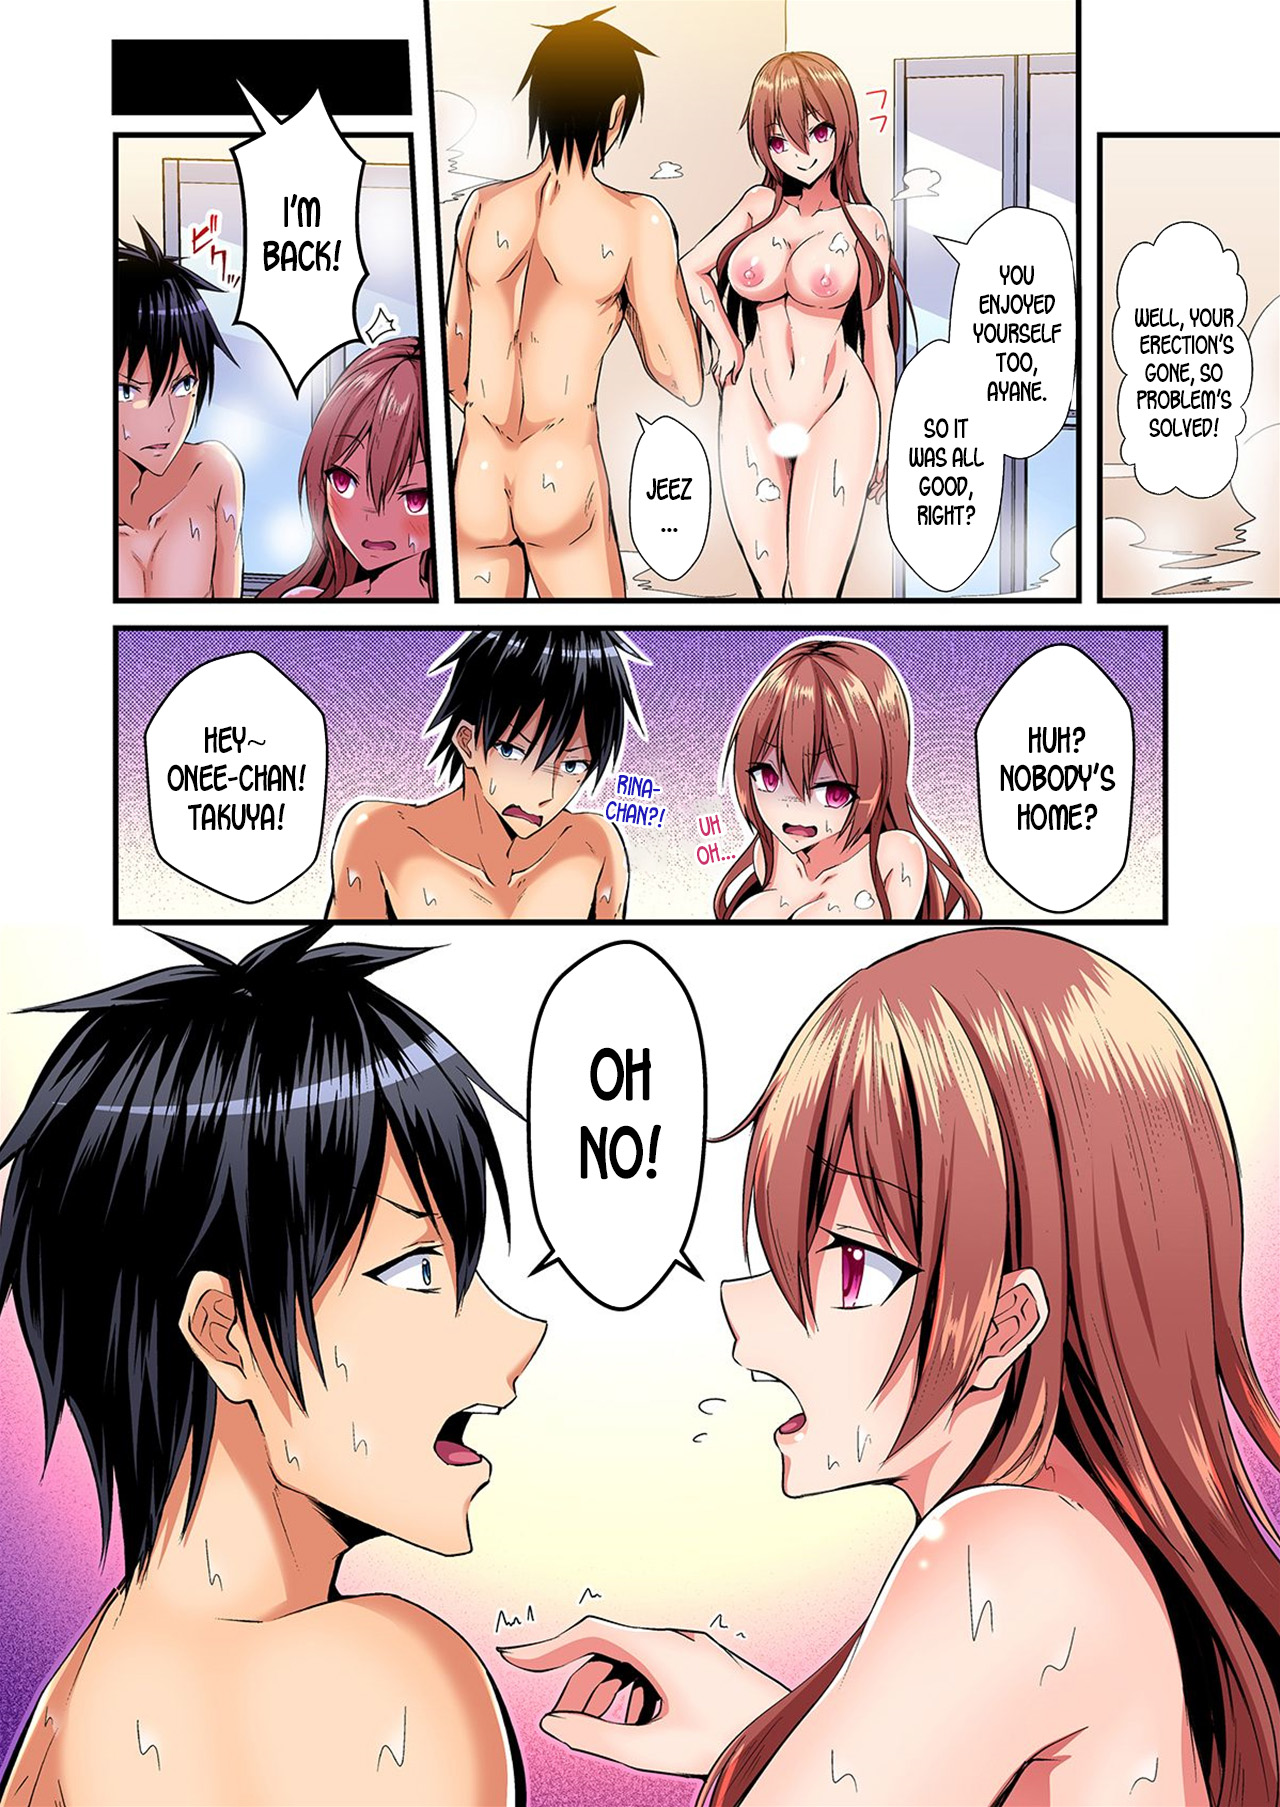 [Suishin Tenra] Switch bodies and have noisy sex! I can't stand Ayanee's sensitive body ch.1-2 [desudesu] page 50 full